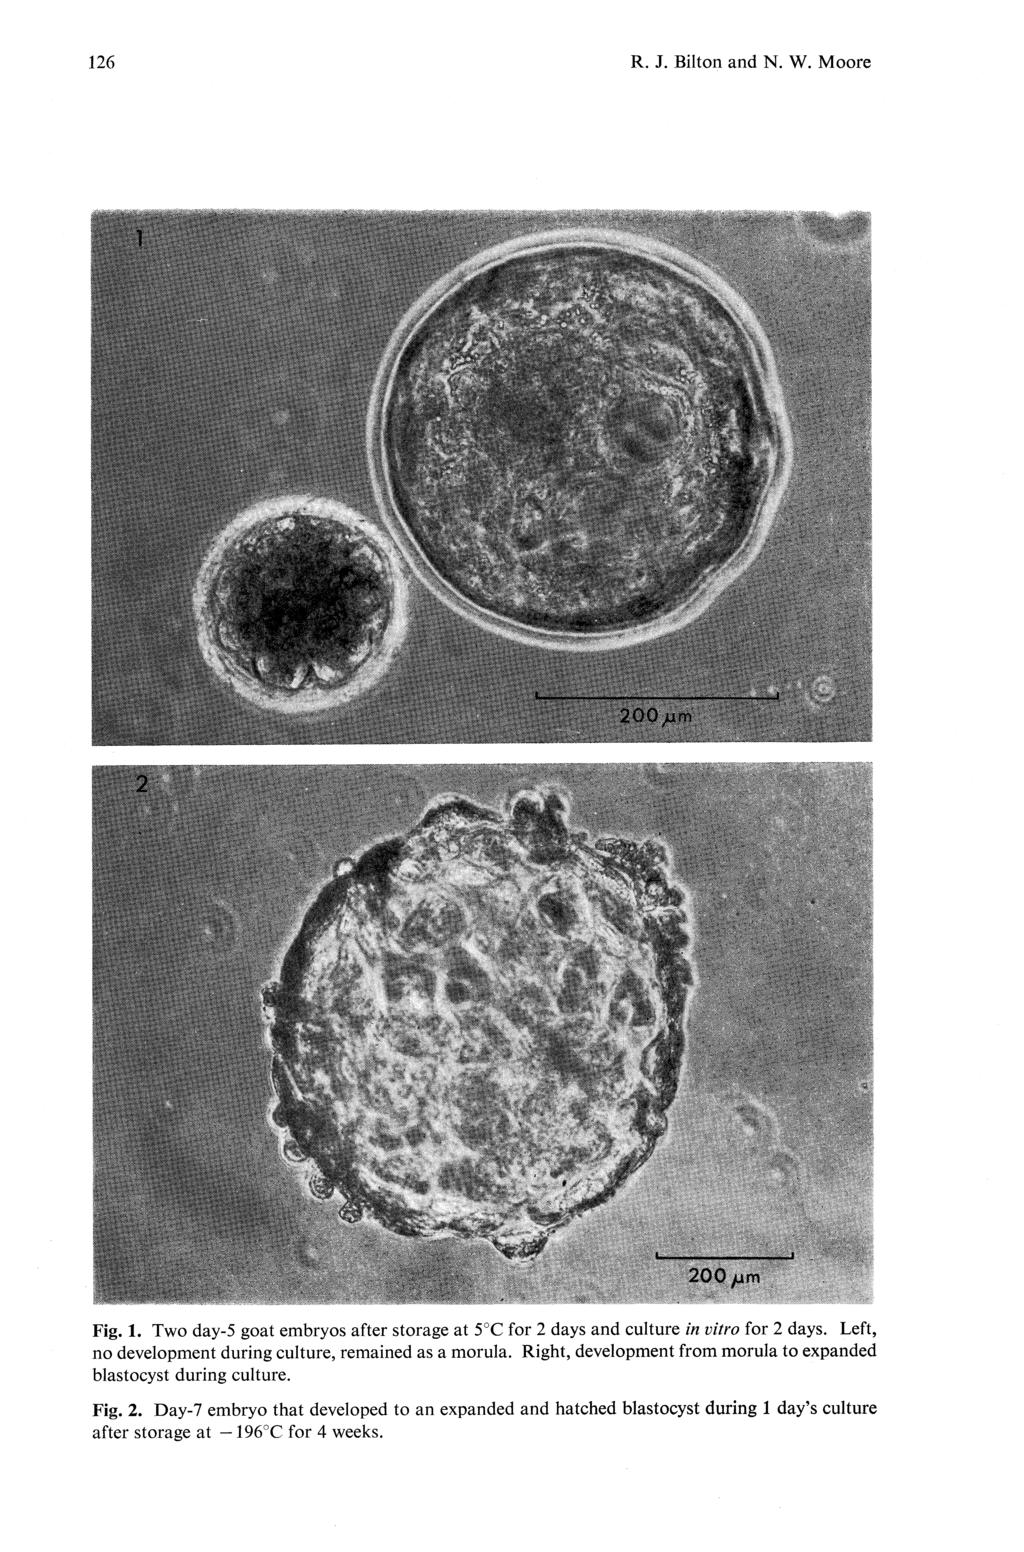 126 R. J. Bilton and N. W. Moore Fig. 1. Two day-5 goat embryos after storage at 5 C for 2 days and culture in vitro for 2 days. Left, no development during culture, remained as a morula.